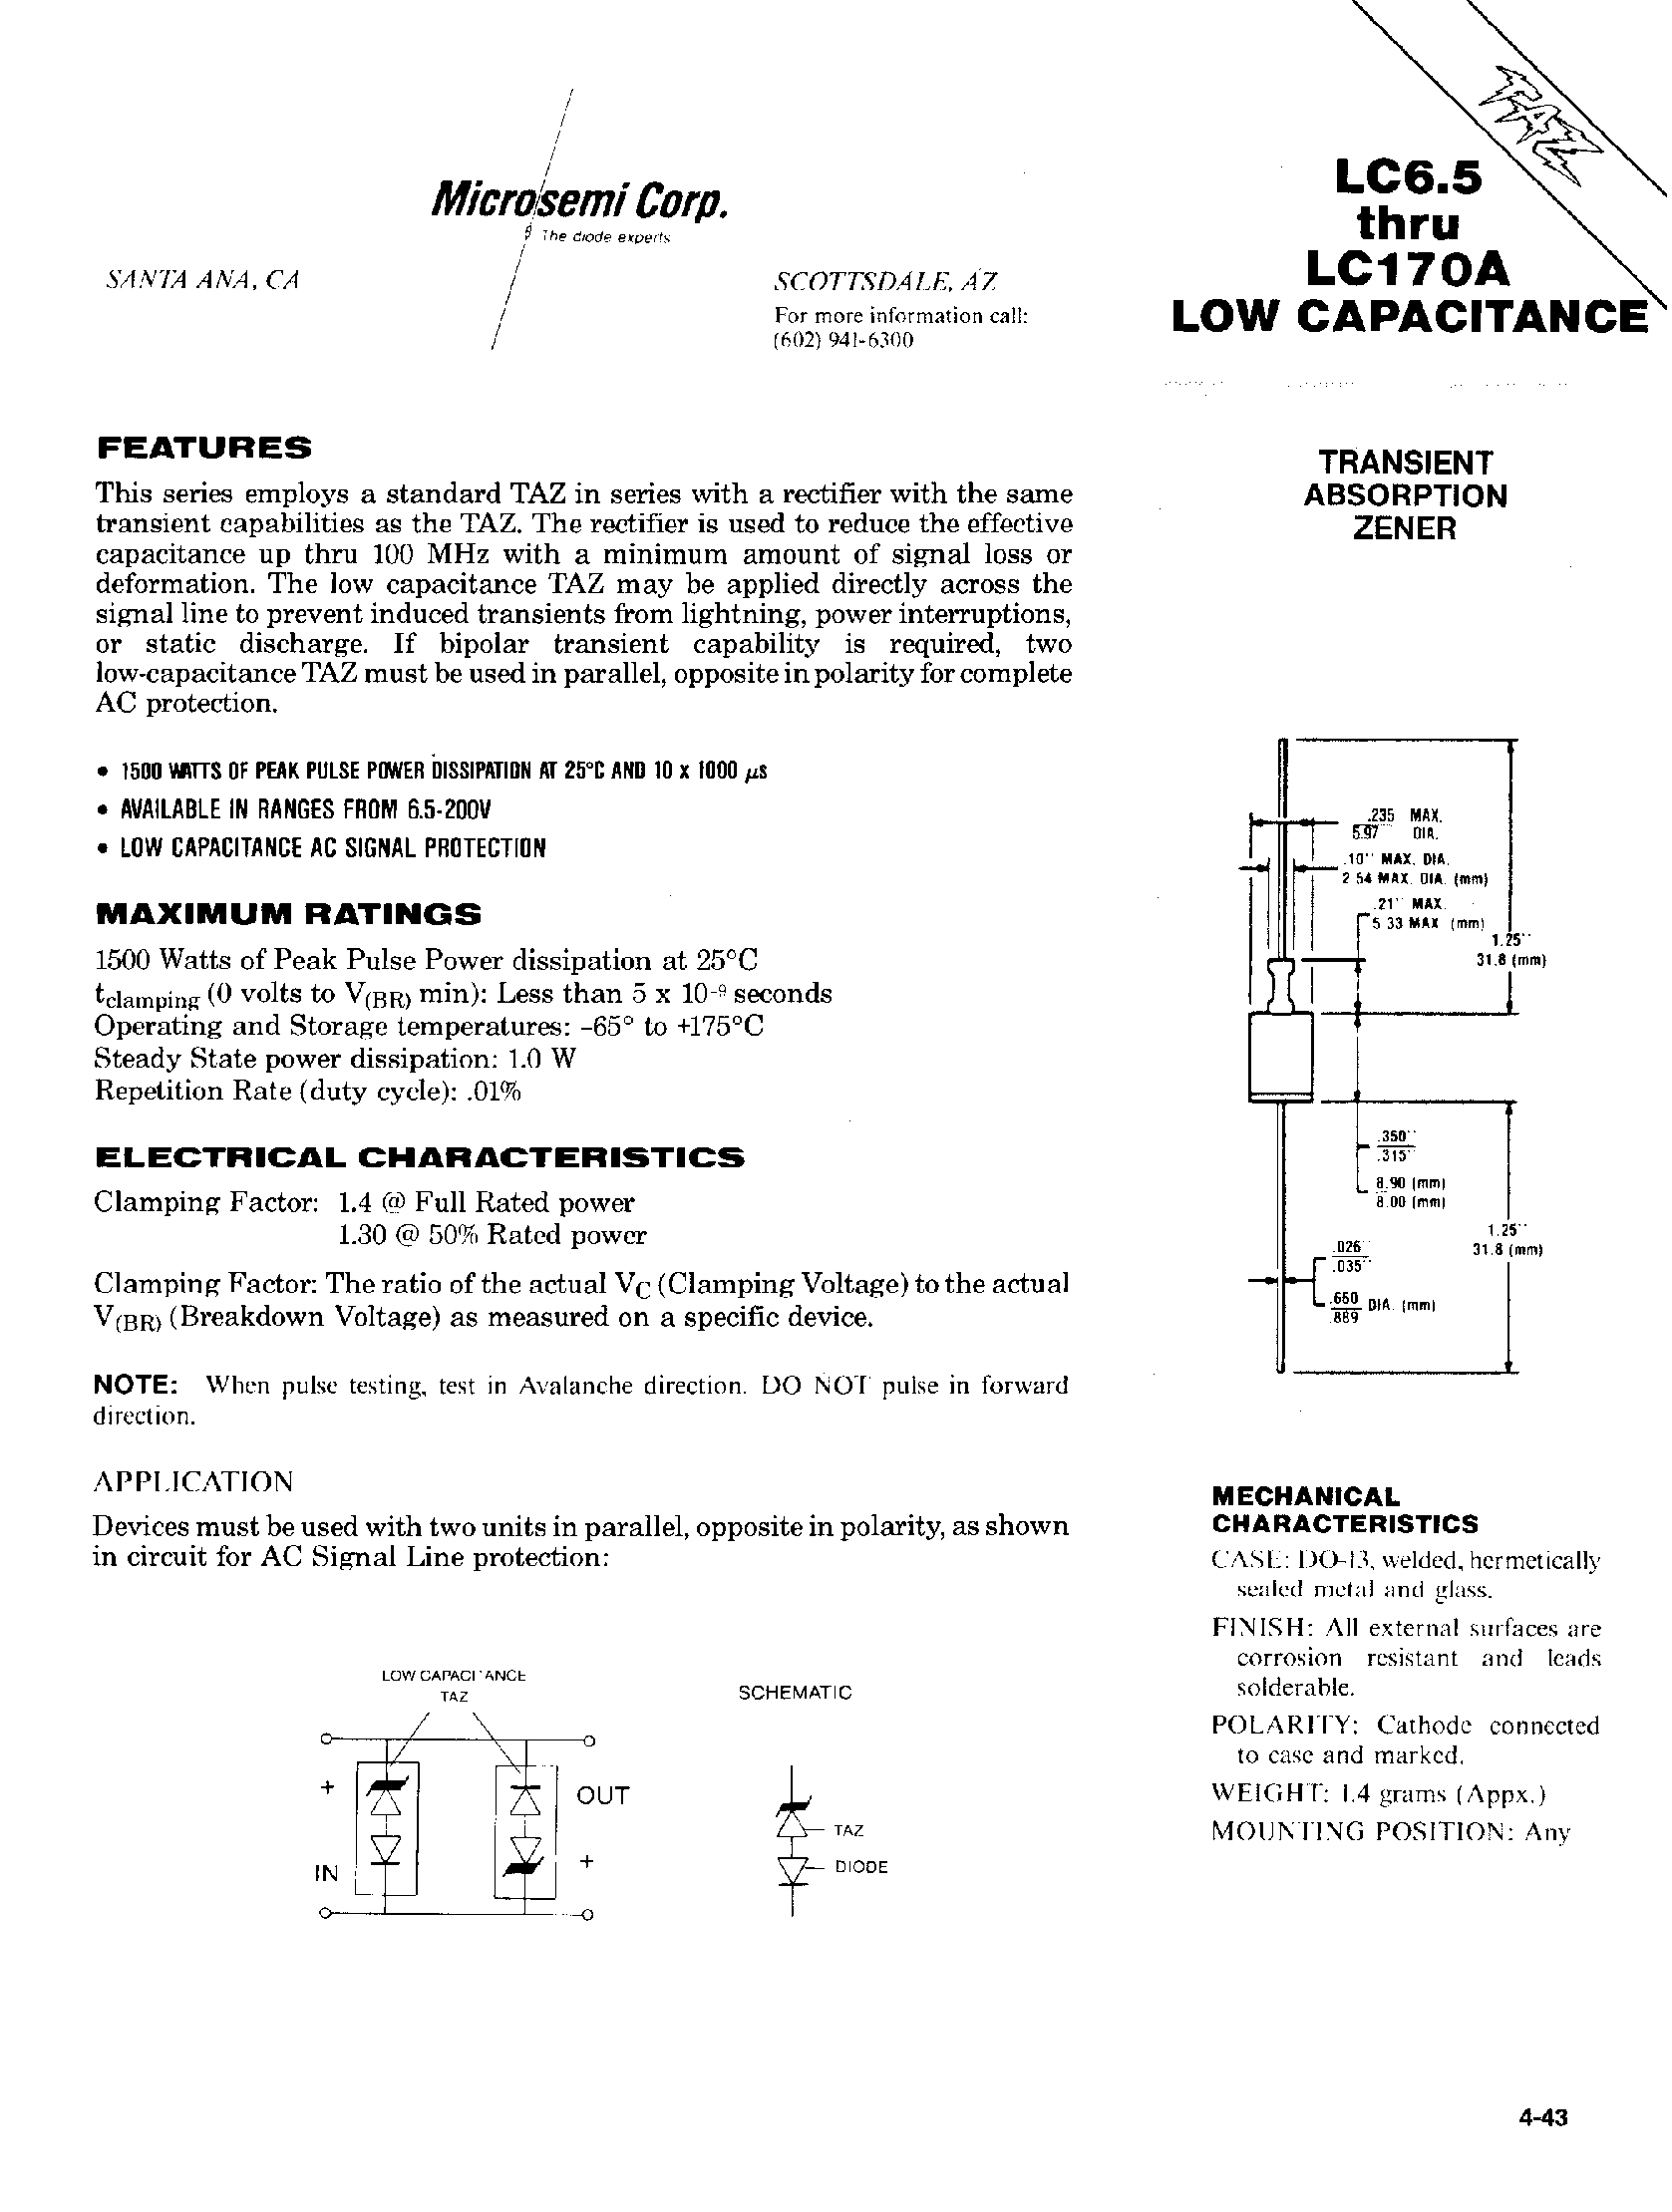 Даташит LC100A - TRANSIENT ABSORPTION ZENER страница 1